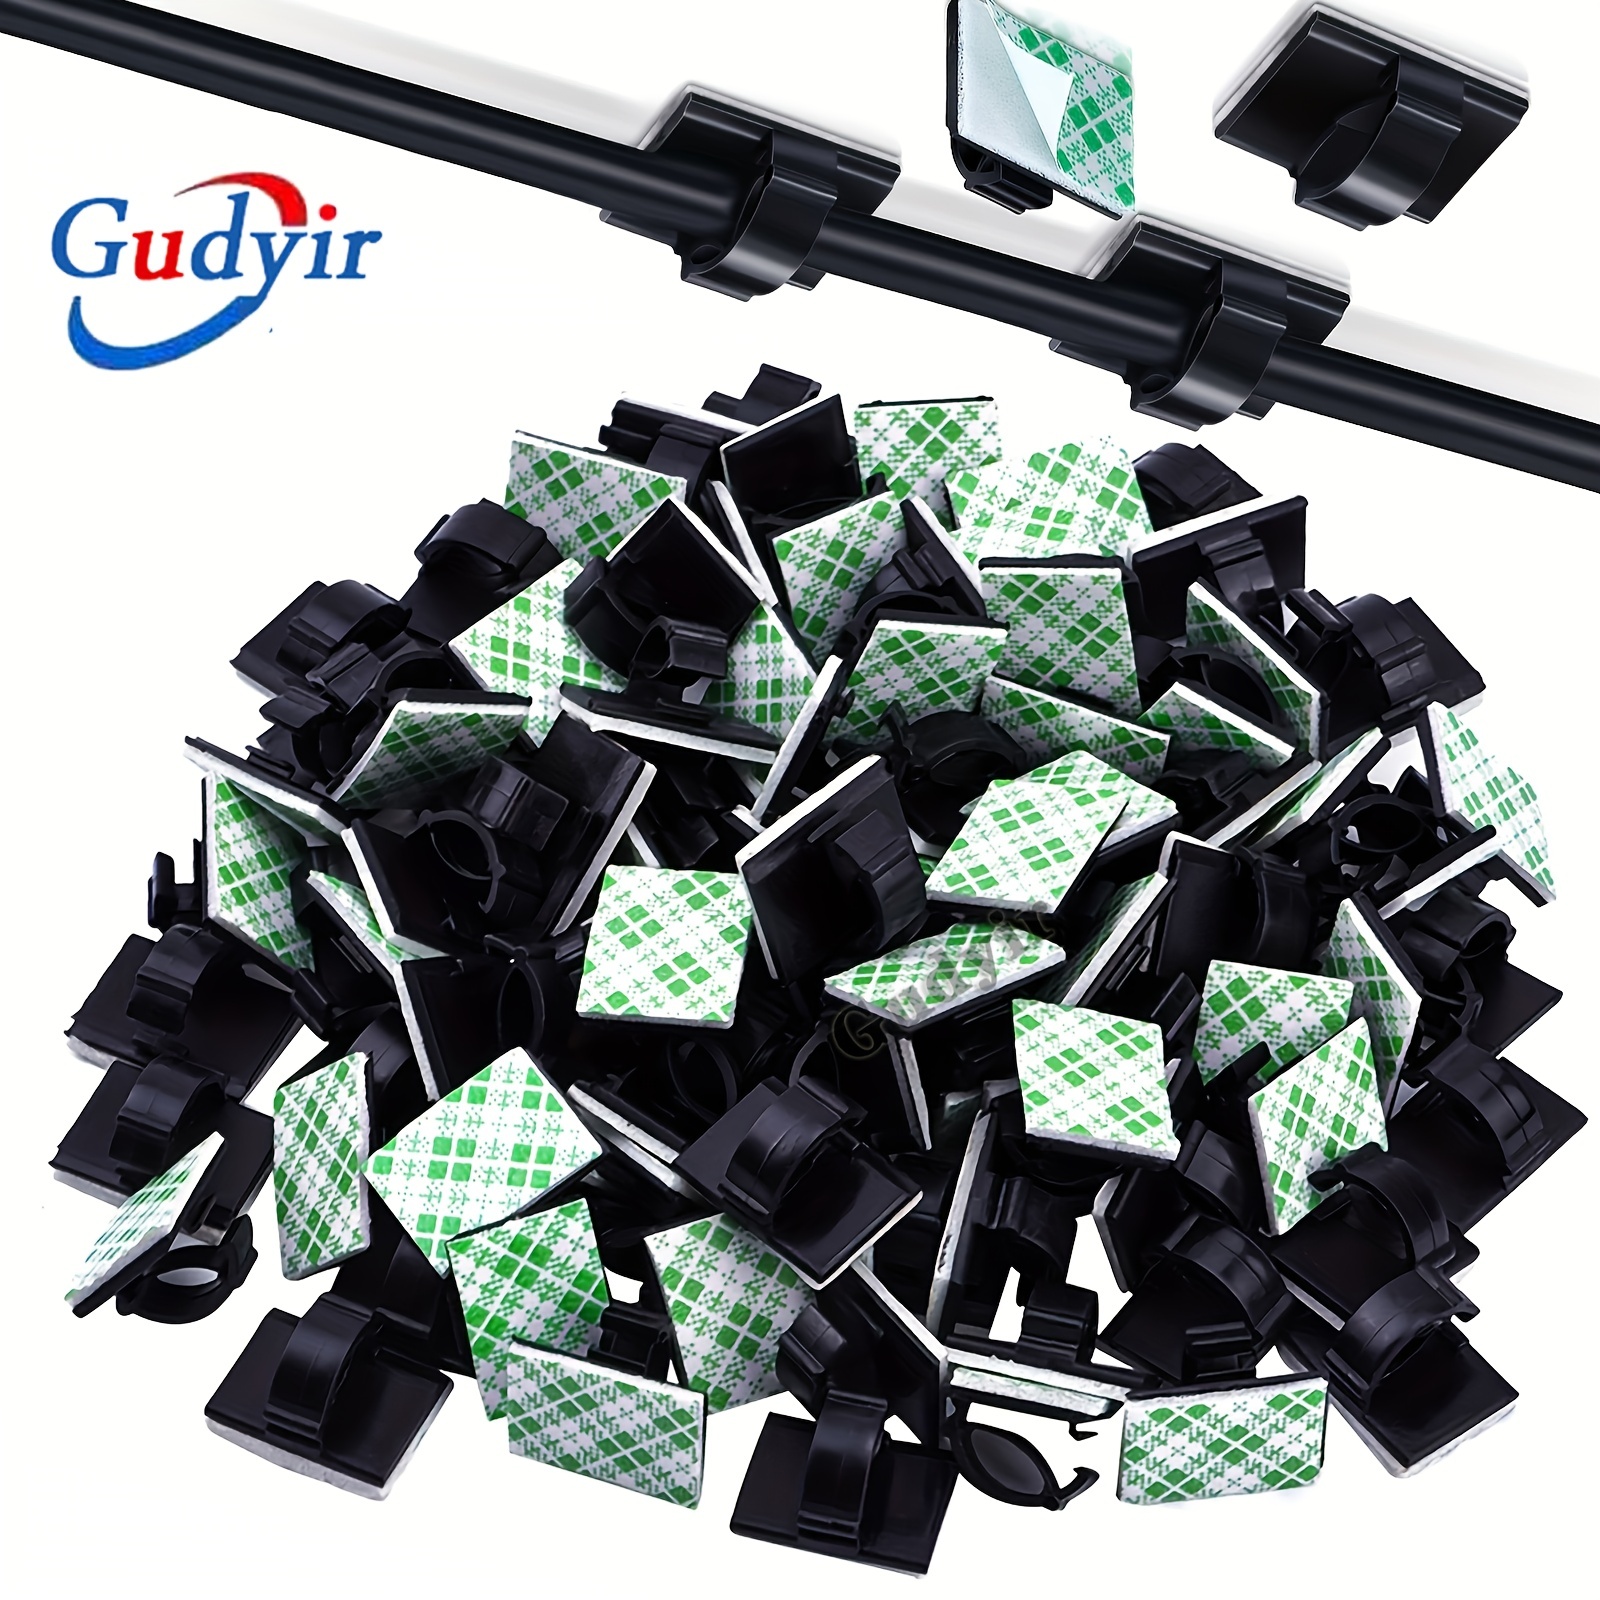 50pcs Adhesive Cable Clips Wire Clips for Car Office Home